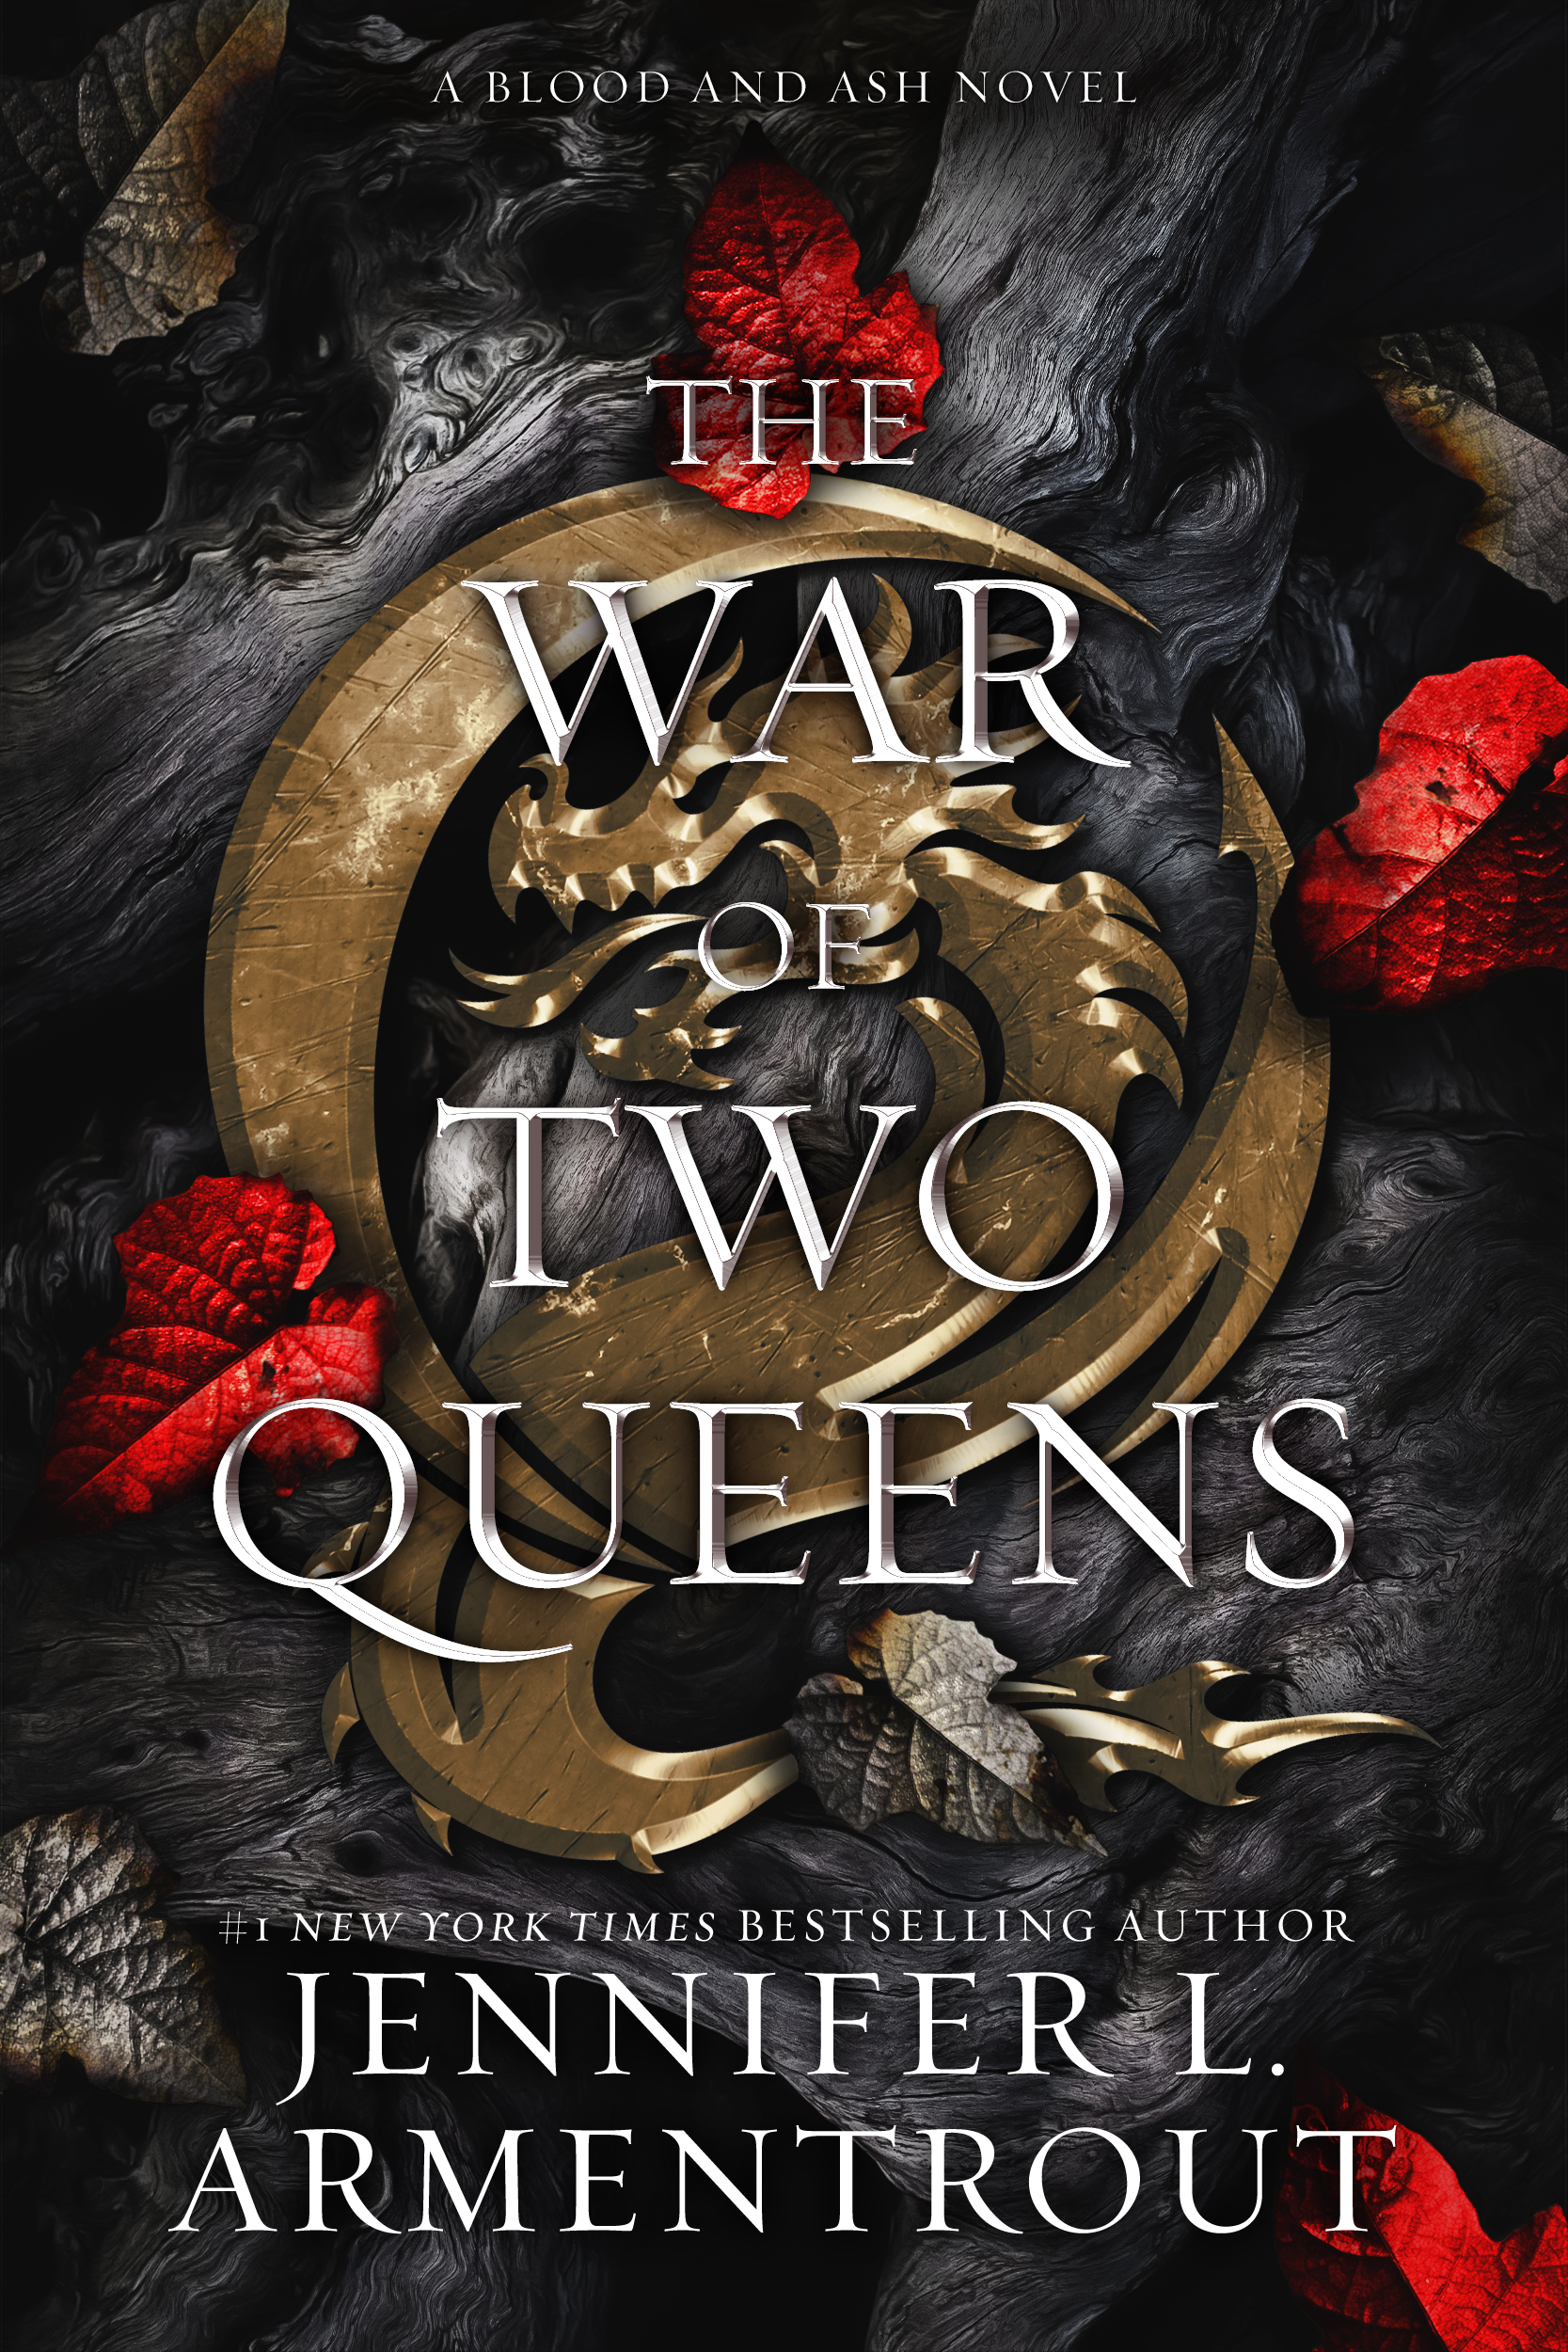 Image de couverture de The War of Two Queens [electronic resource] : A Blood and Ash Novel